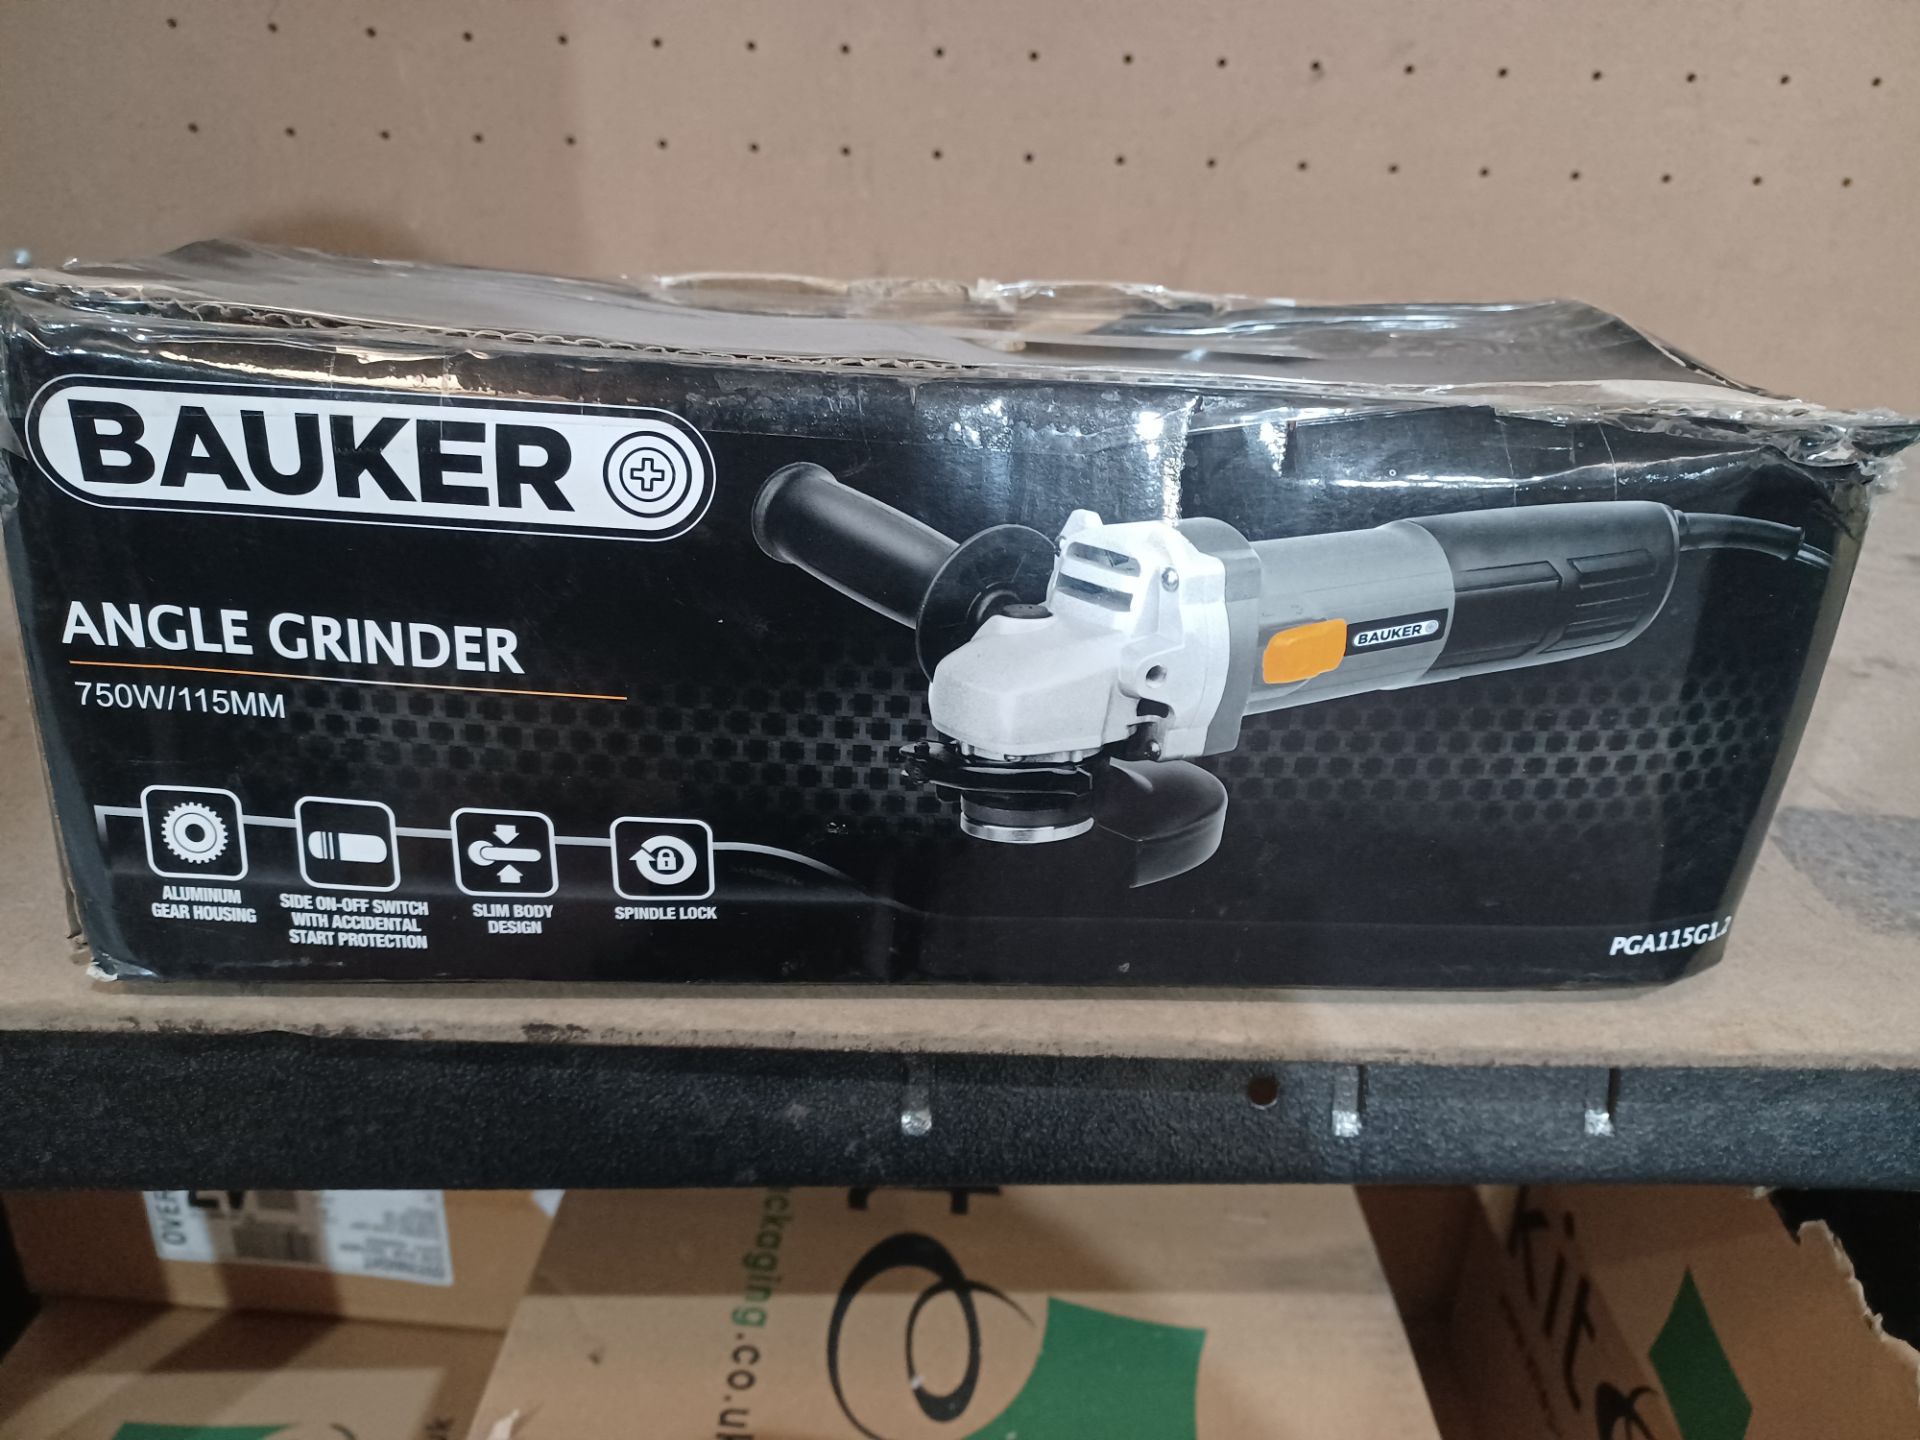 2 X BAUKER ANGLE GRINDER 750W 115MM UNCHECKED - PCK